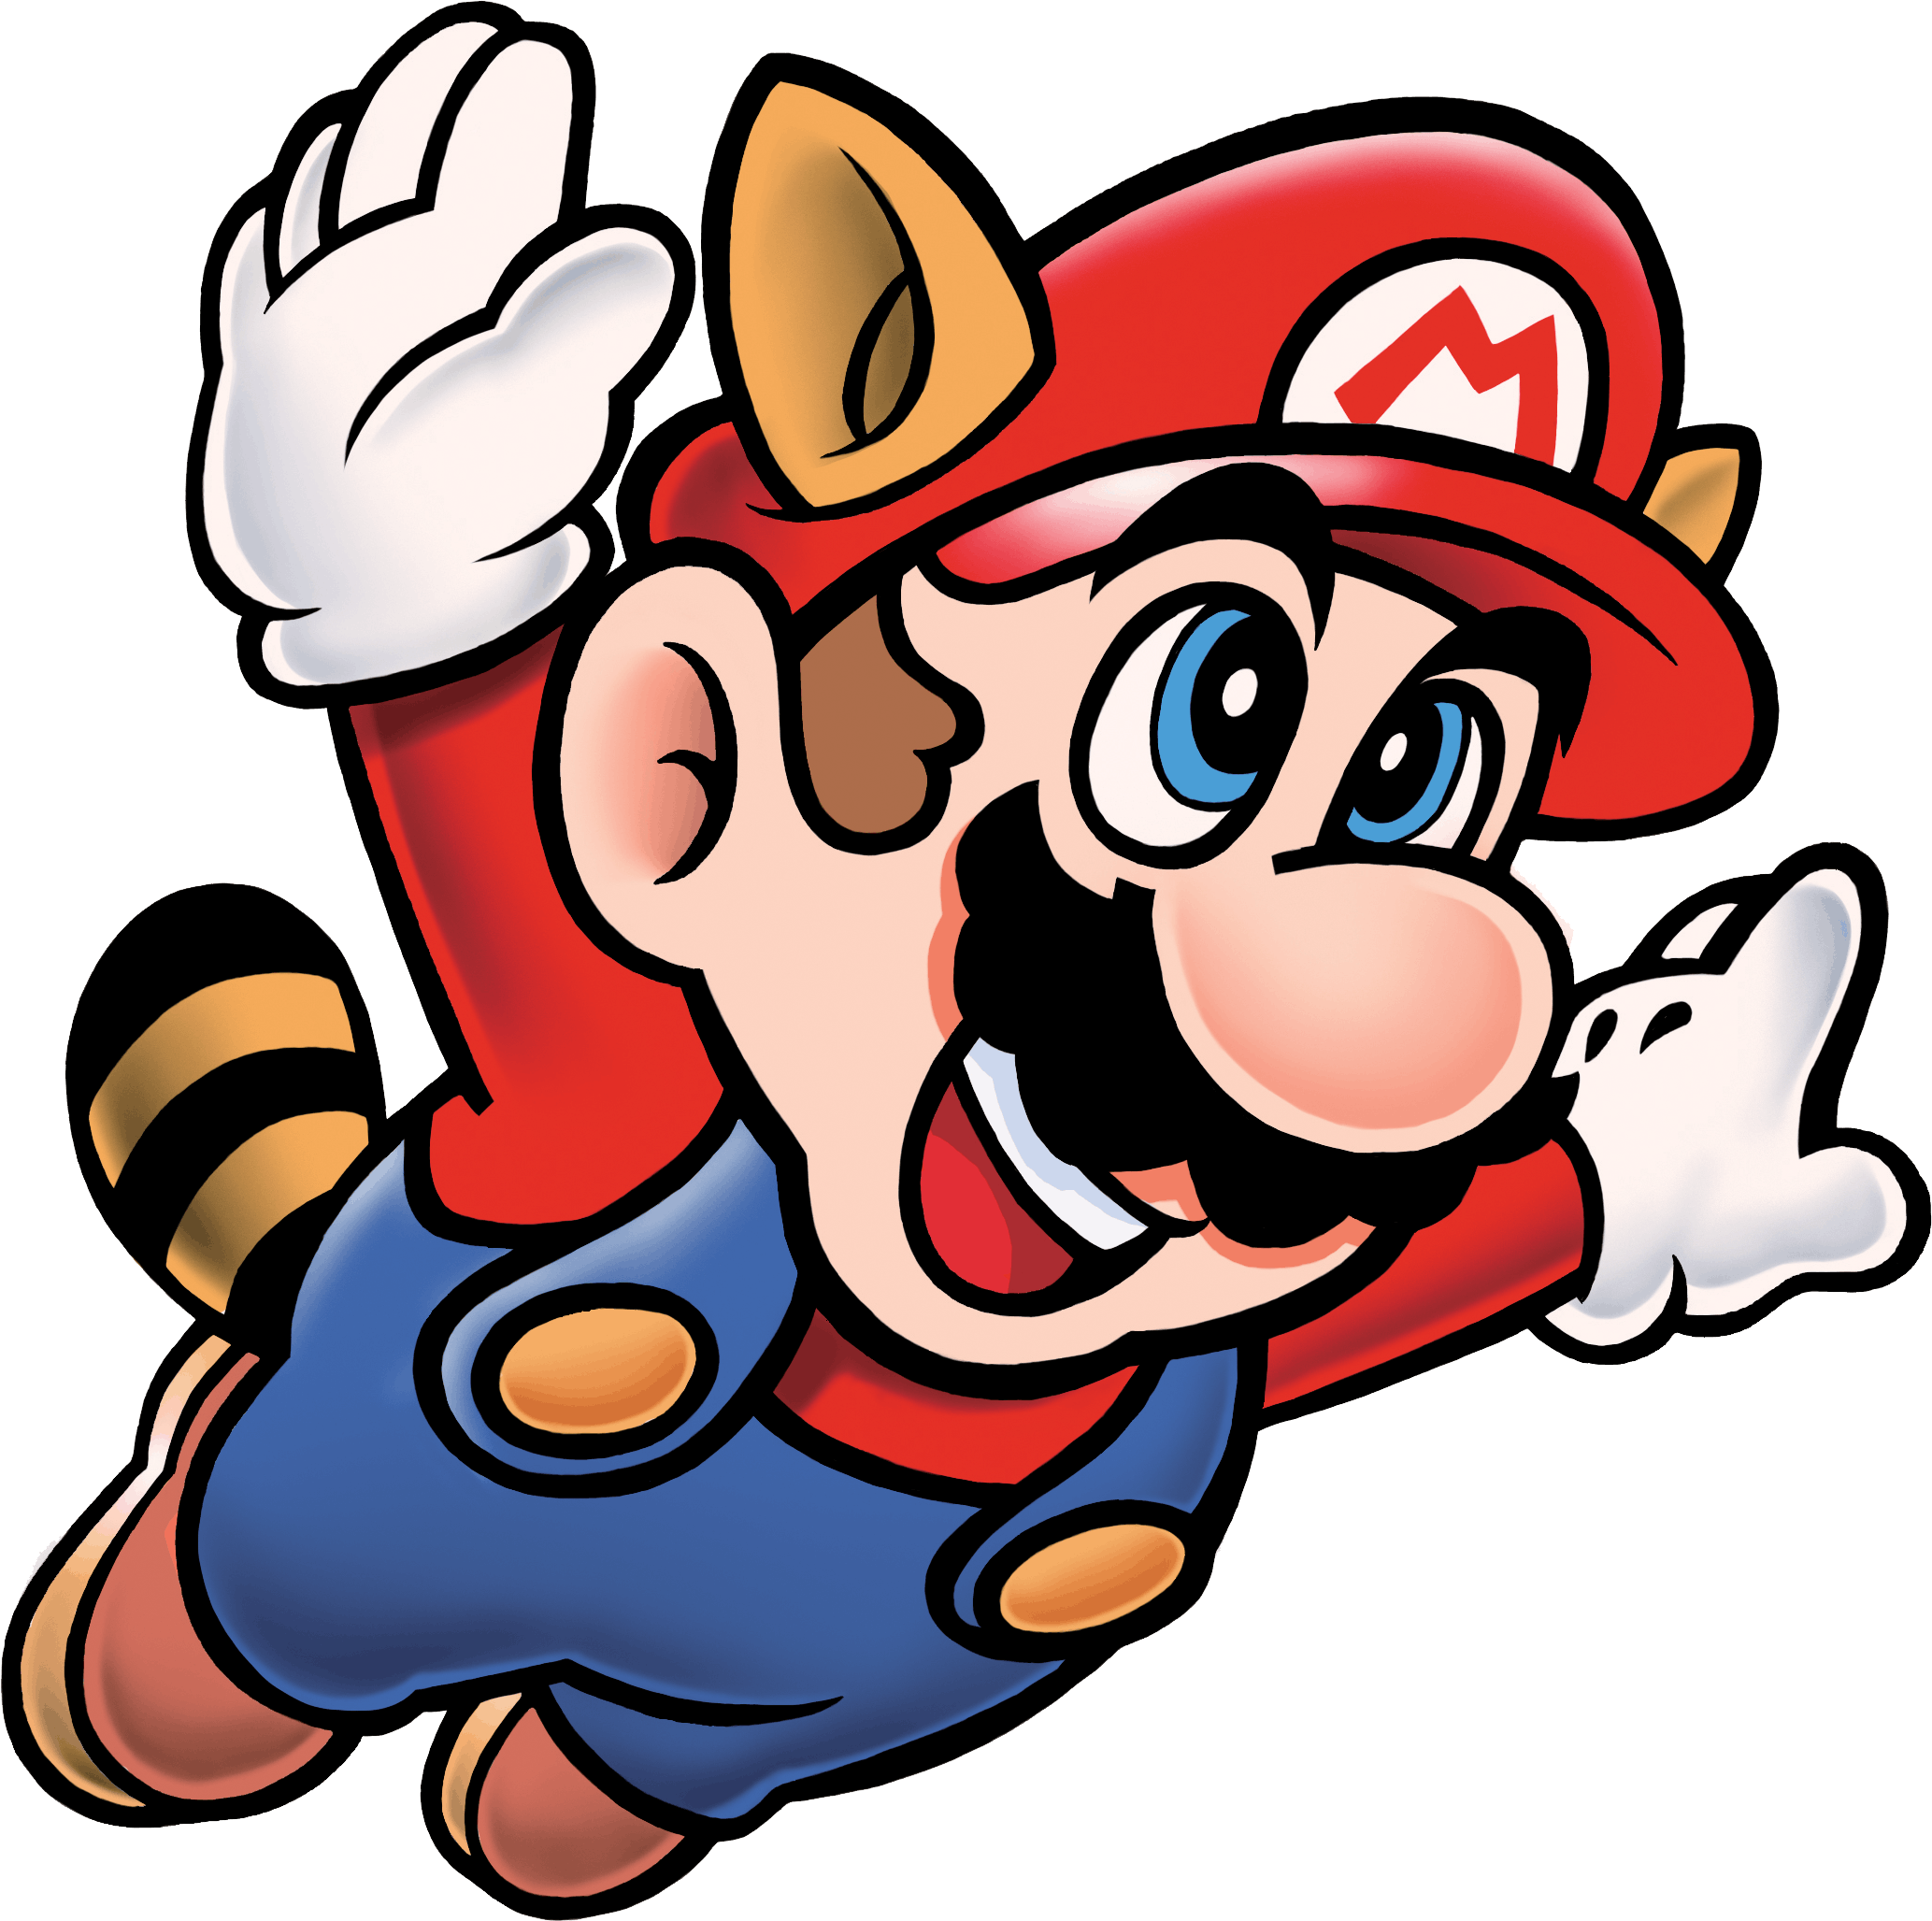 You need to play the most important Mario game on Nintendo Switch ASAP